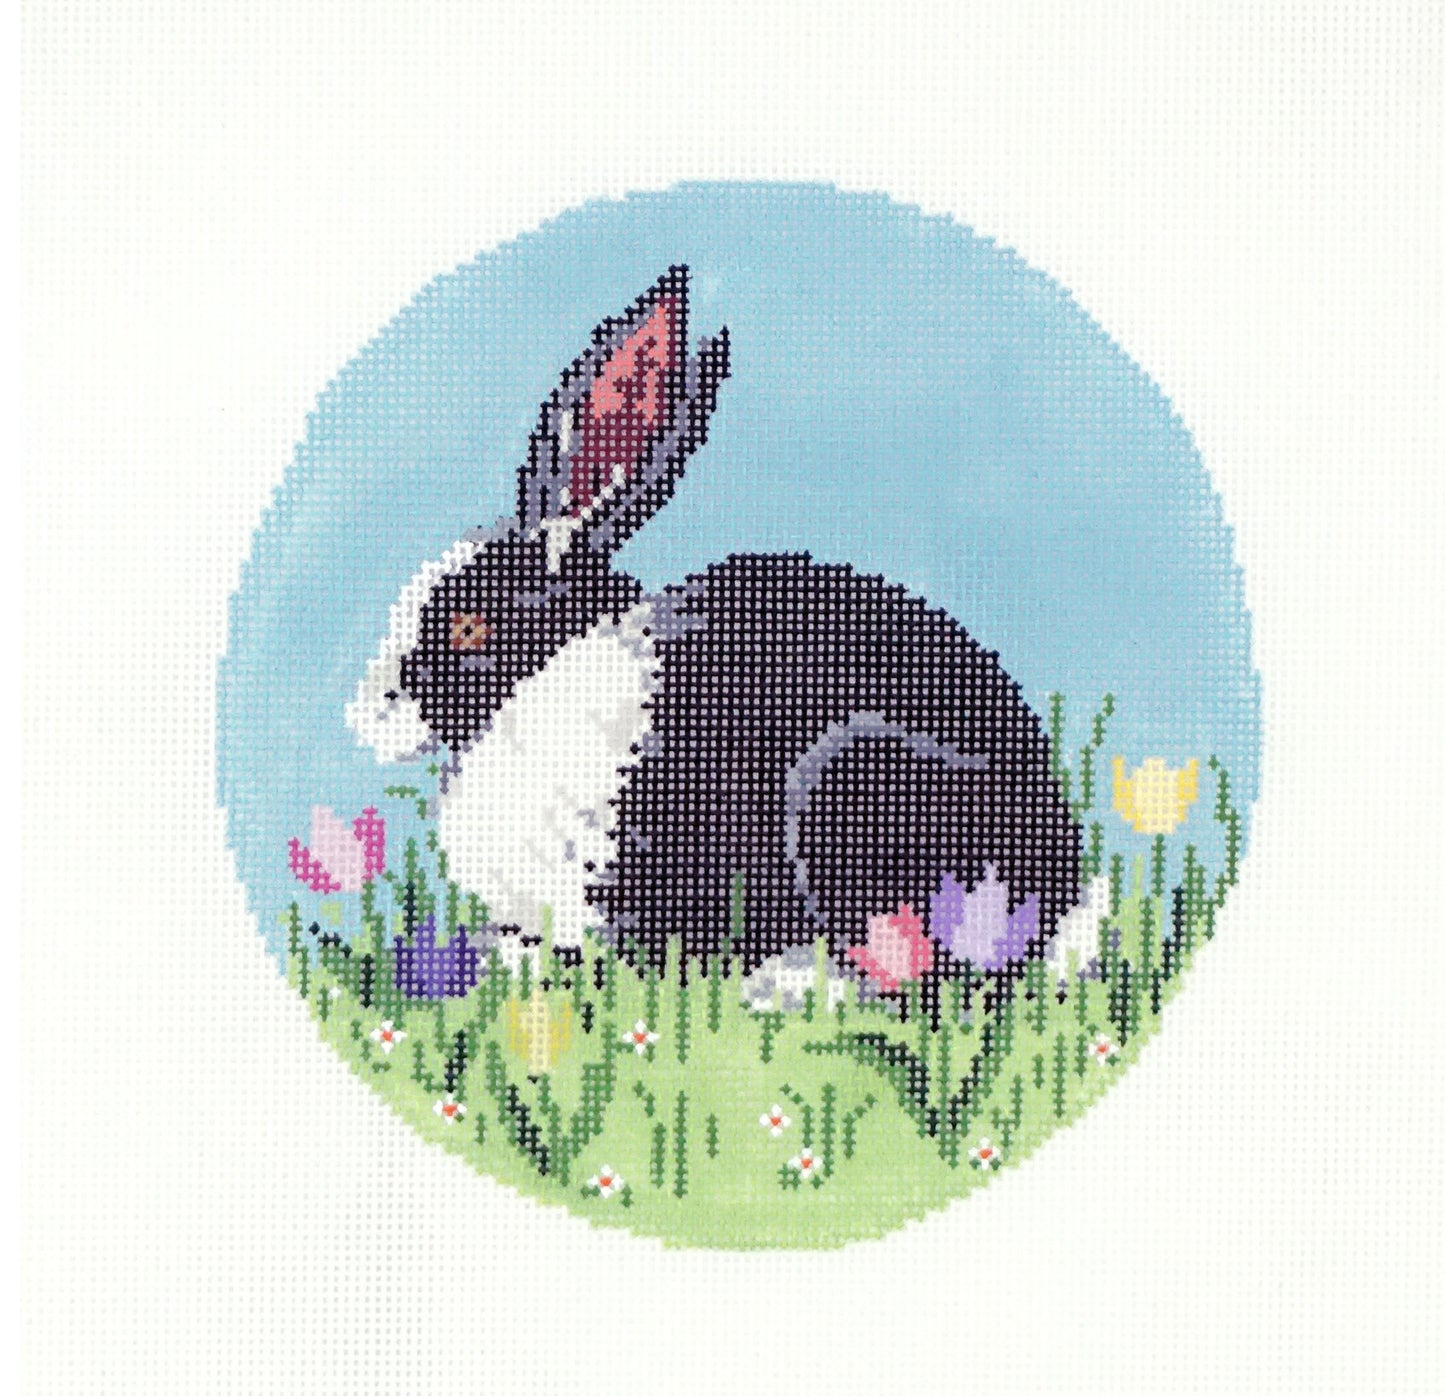 Animal Round "Patches the Bunny" handpainted 5.5" Round Needlepoint Canvas by Sandra Gilmore